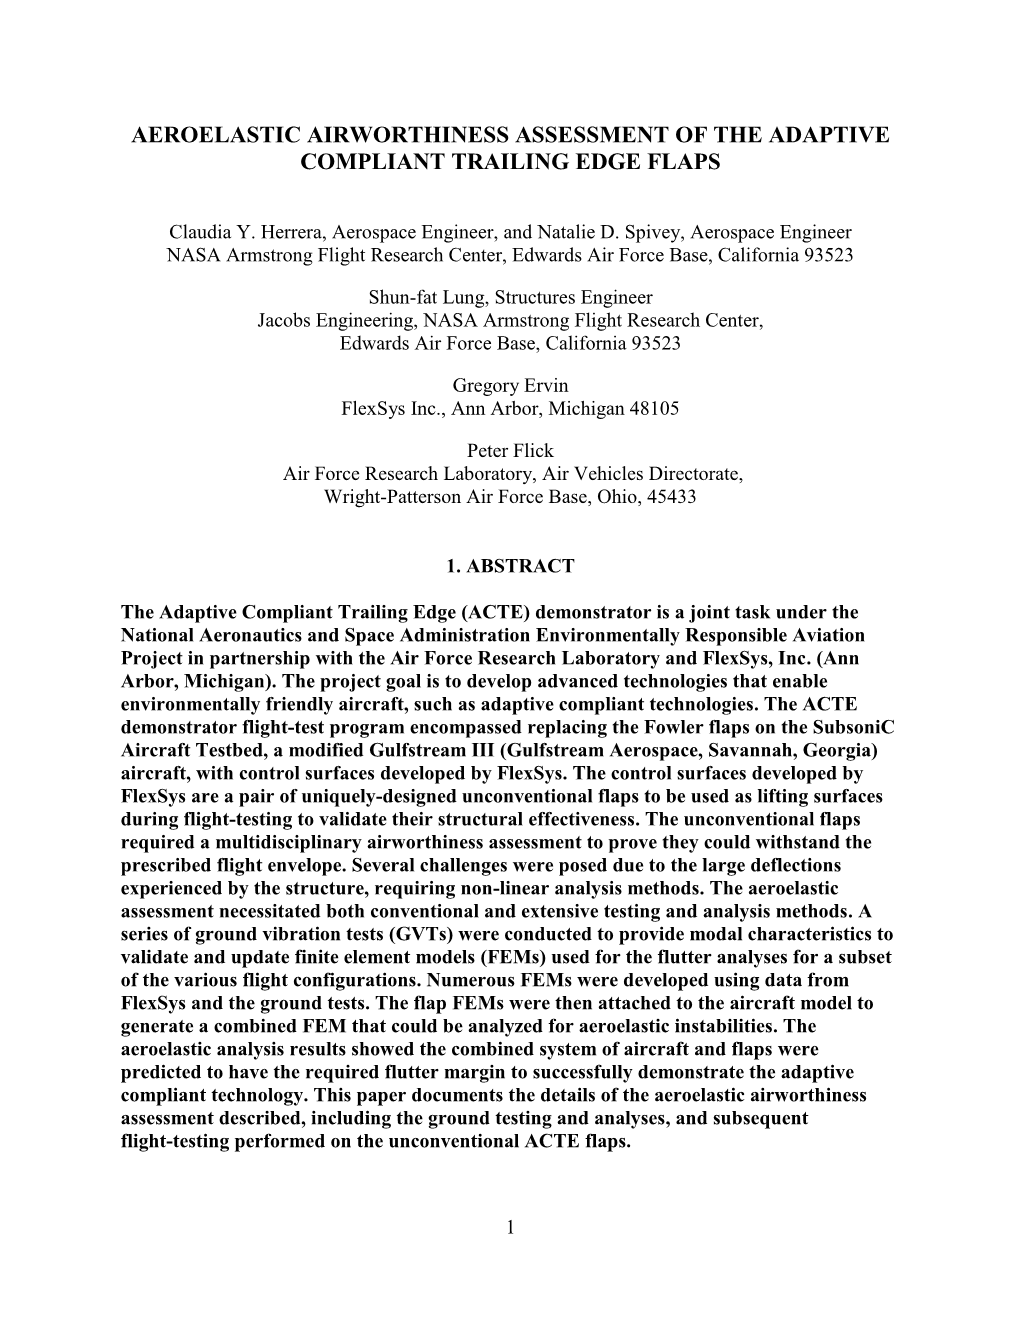 Aeroelastic Airworthiness Assessment of the Adaptive Compliant Trailing Edge Flaps